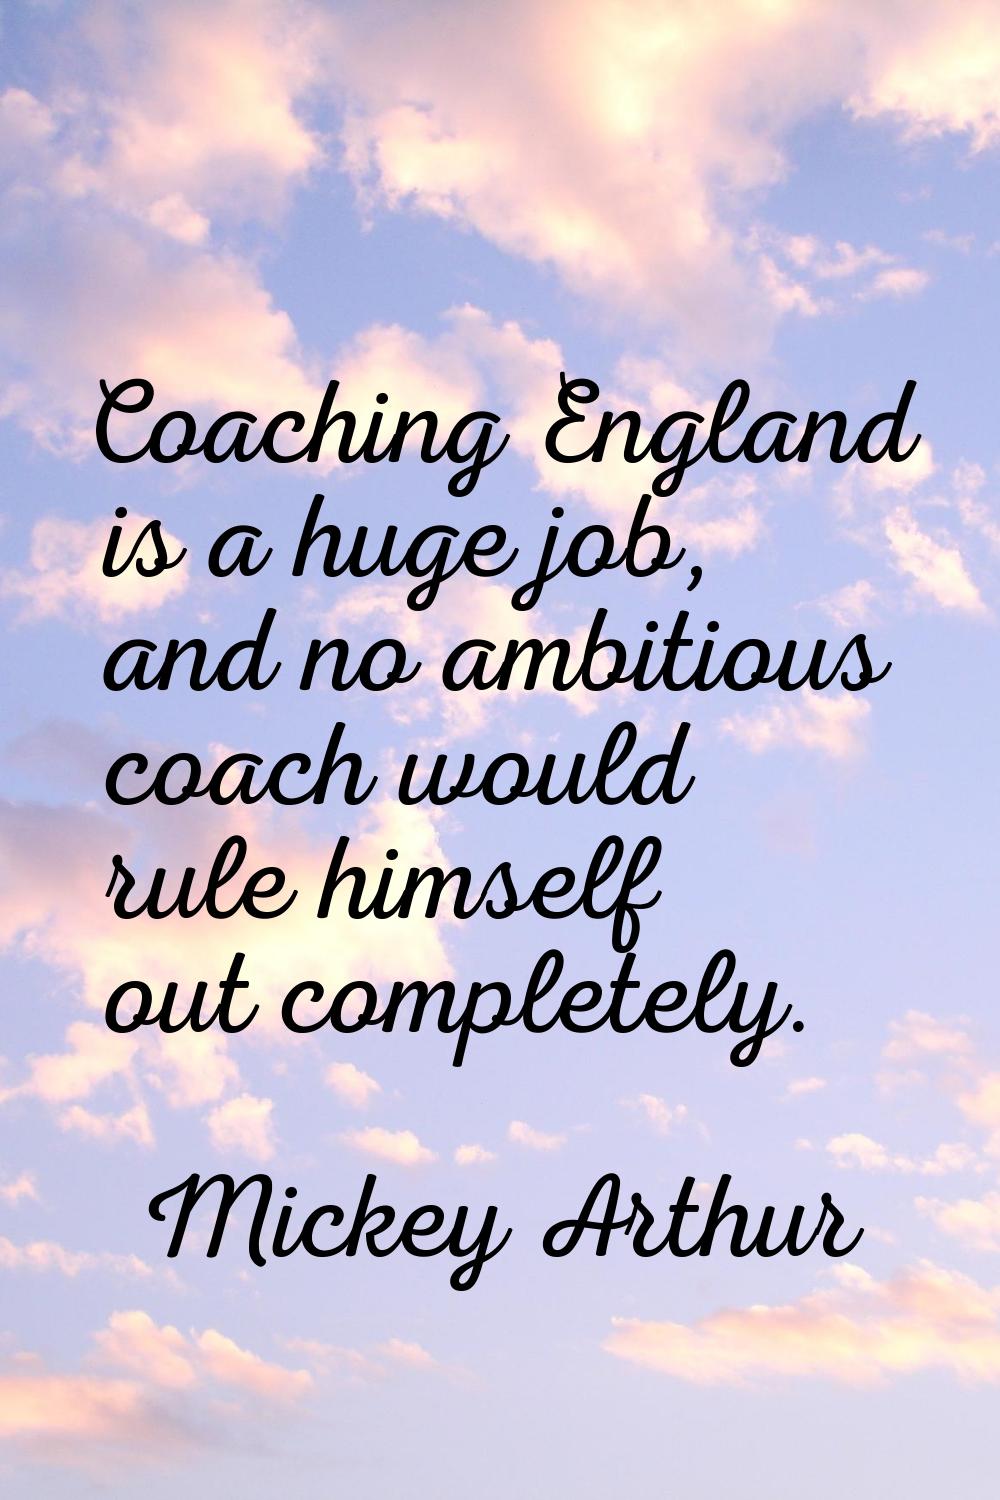 Coaching England is a huge job, and no ambitious coach would rule himself out completely.